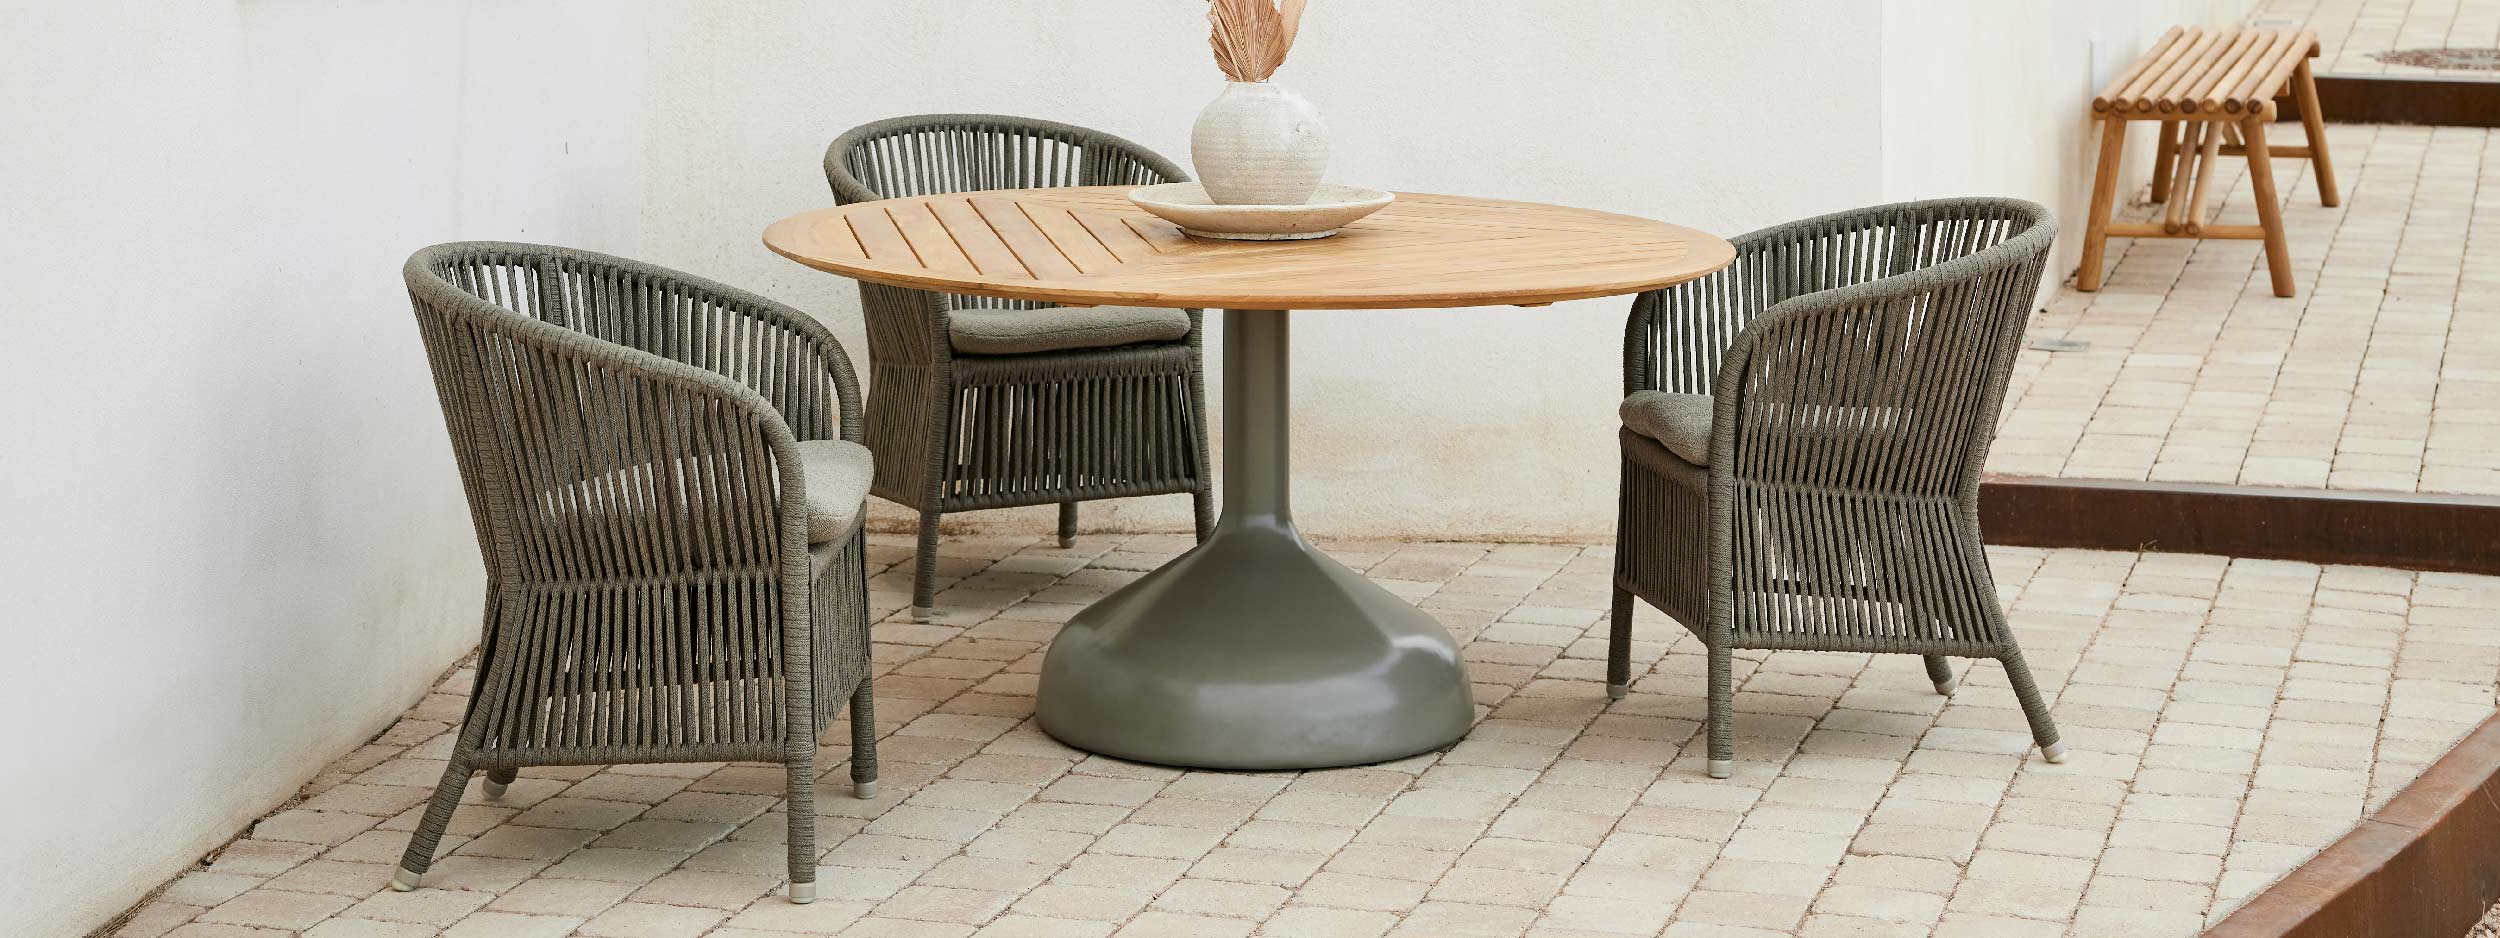 Image of Cane-line Derby garden armchair and Glaze circular dining table with teak top